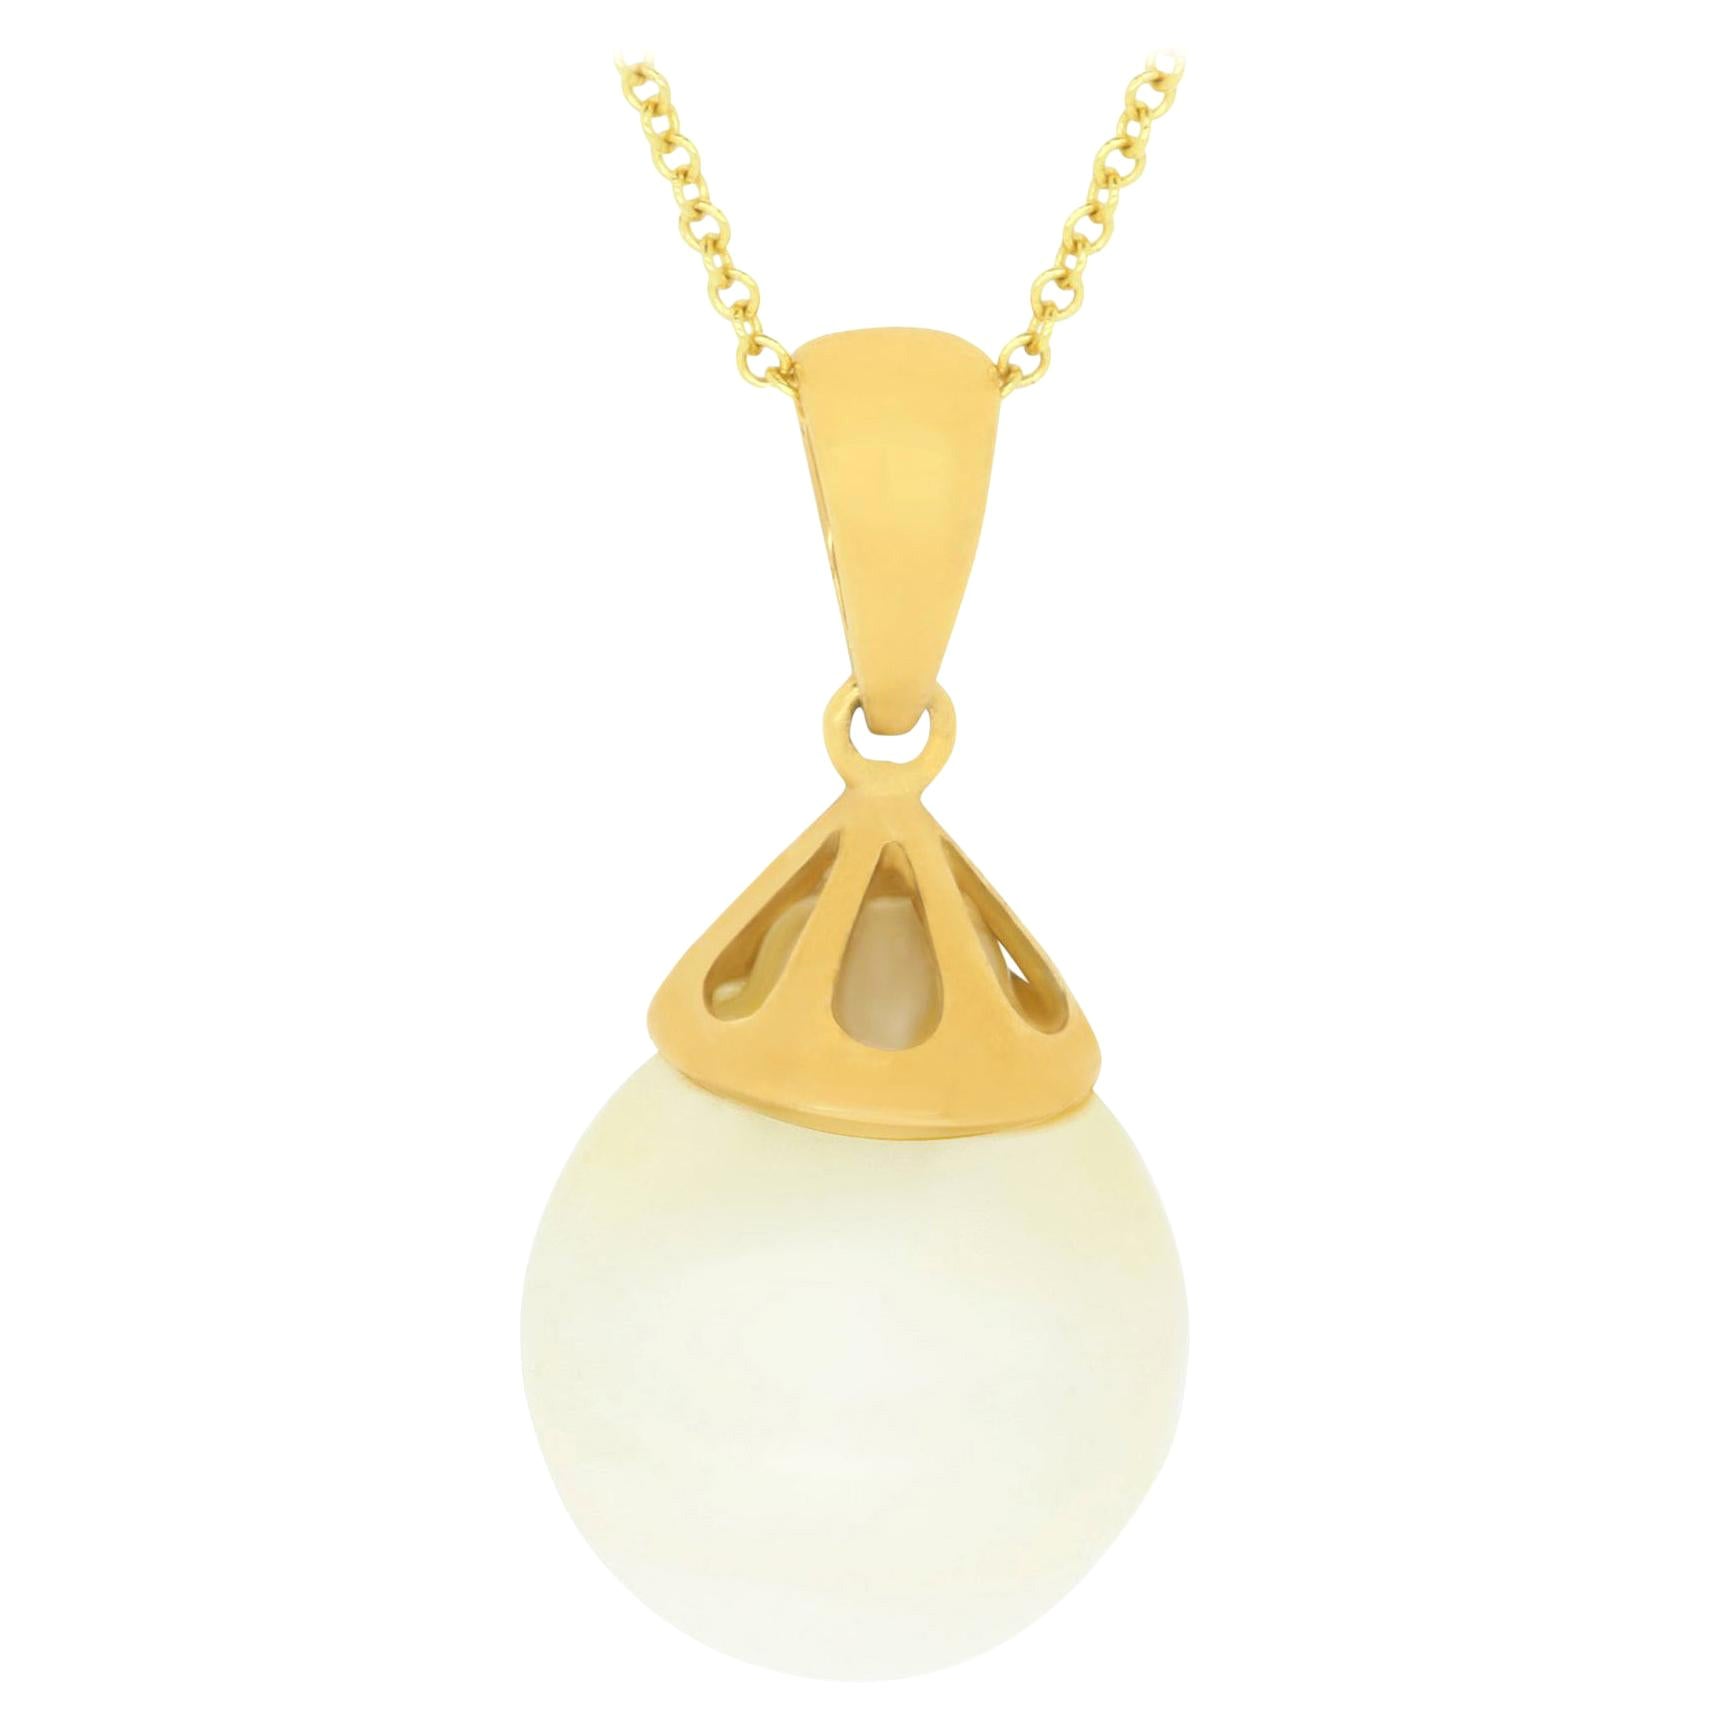 White Natural Pearl Pendant Necklace Chain 18k Yellow Gold Open Bail Design For Sale